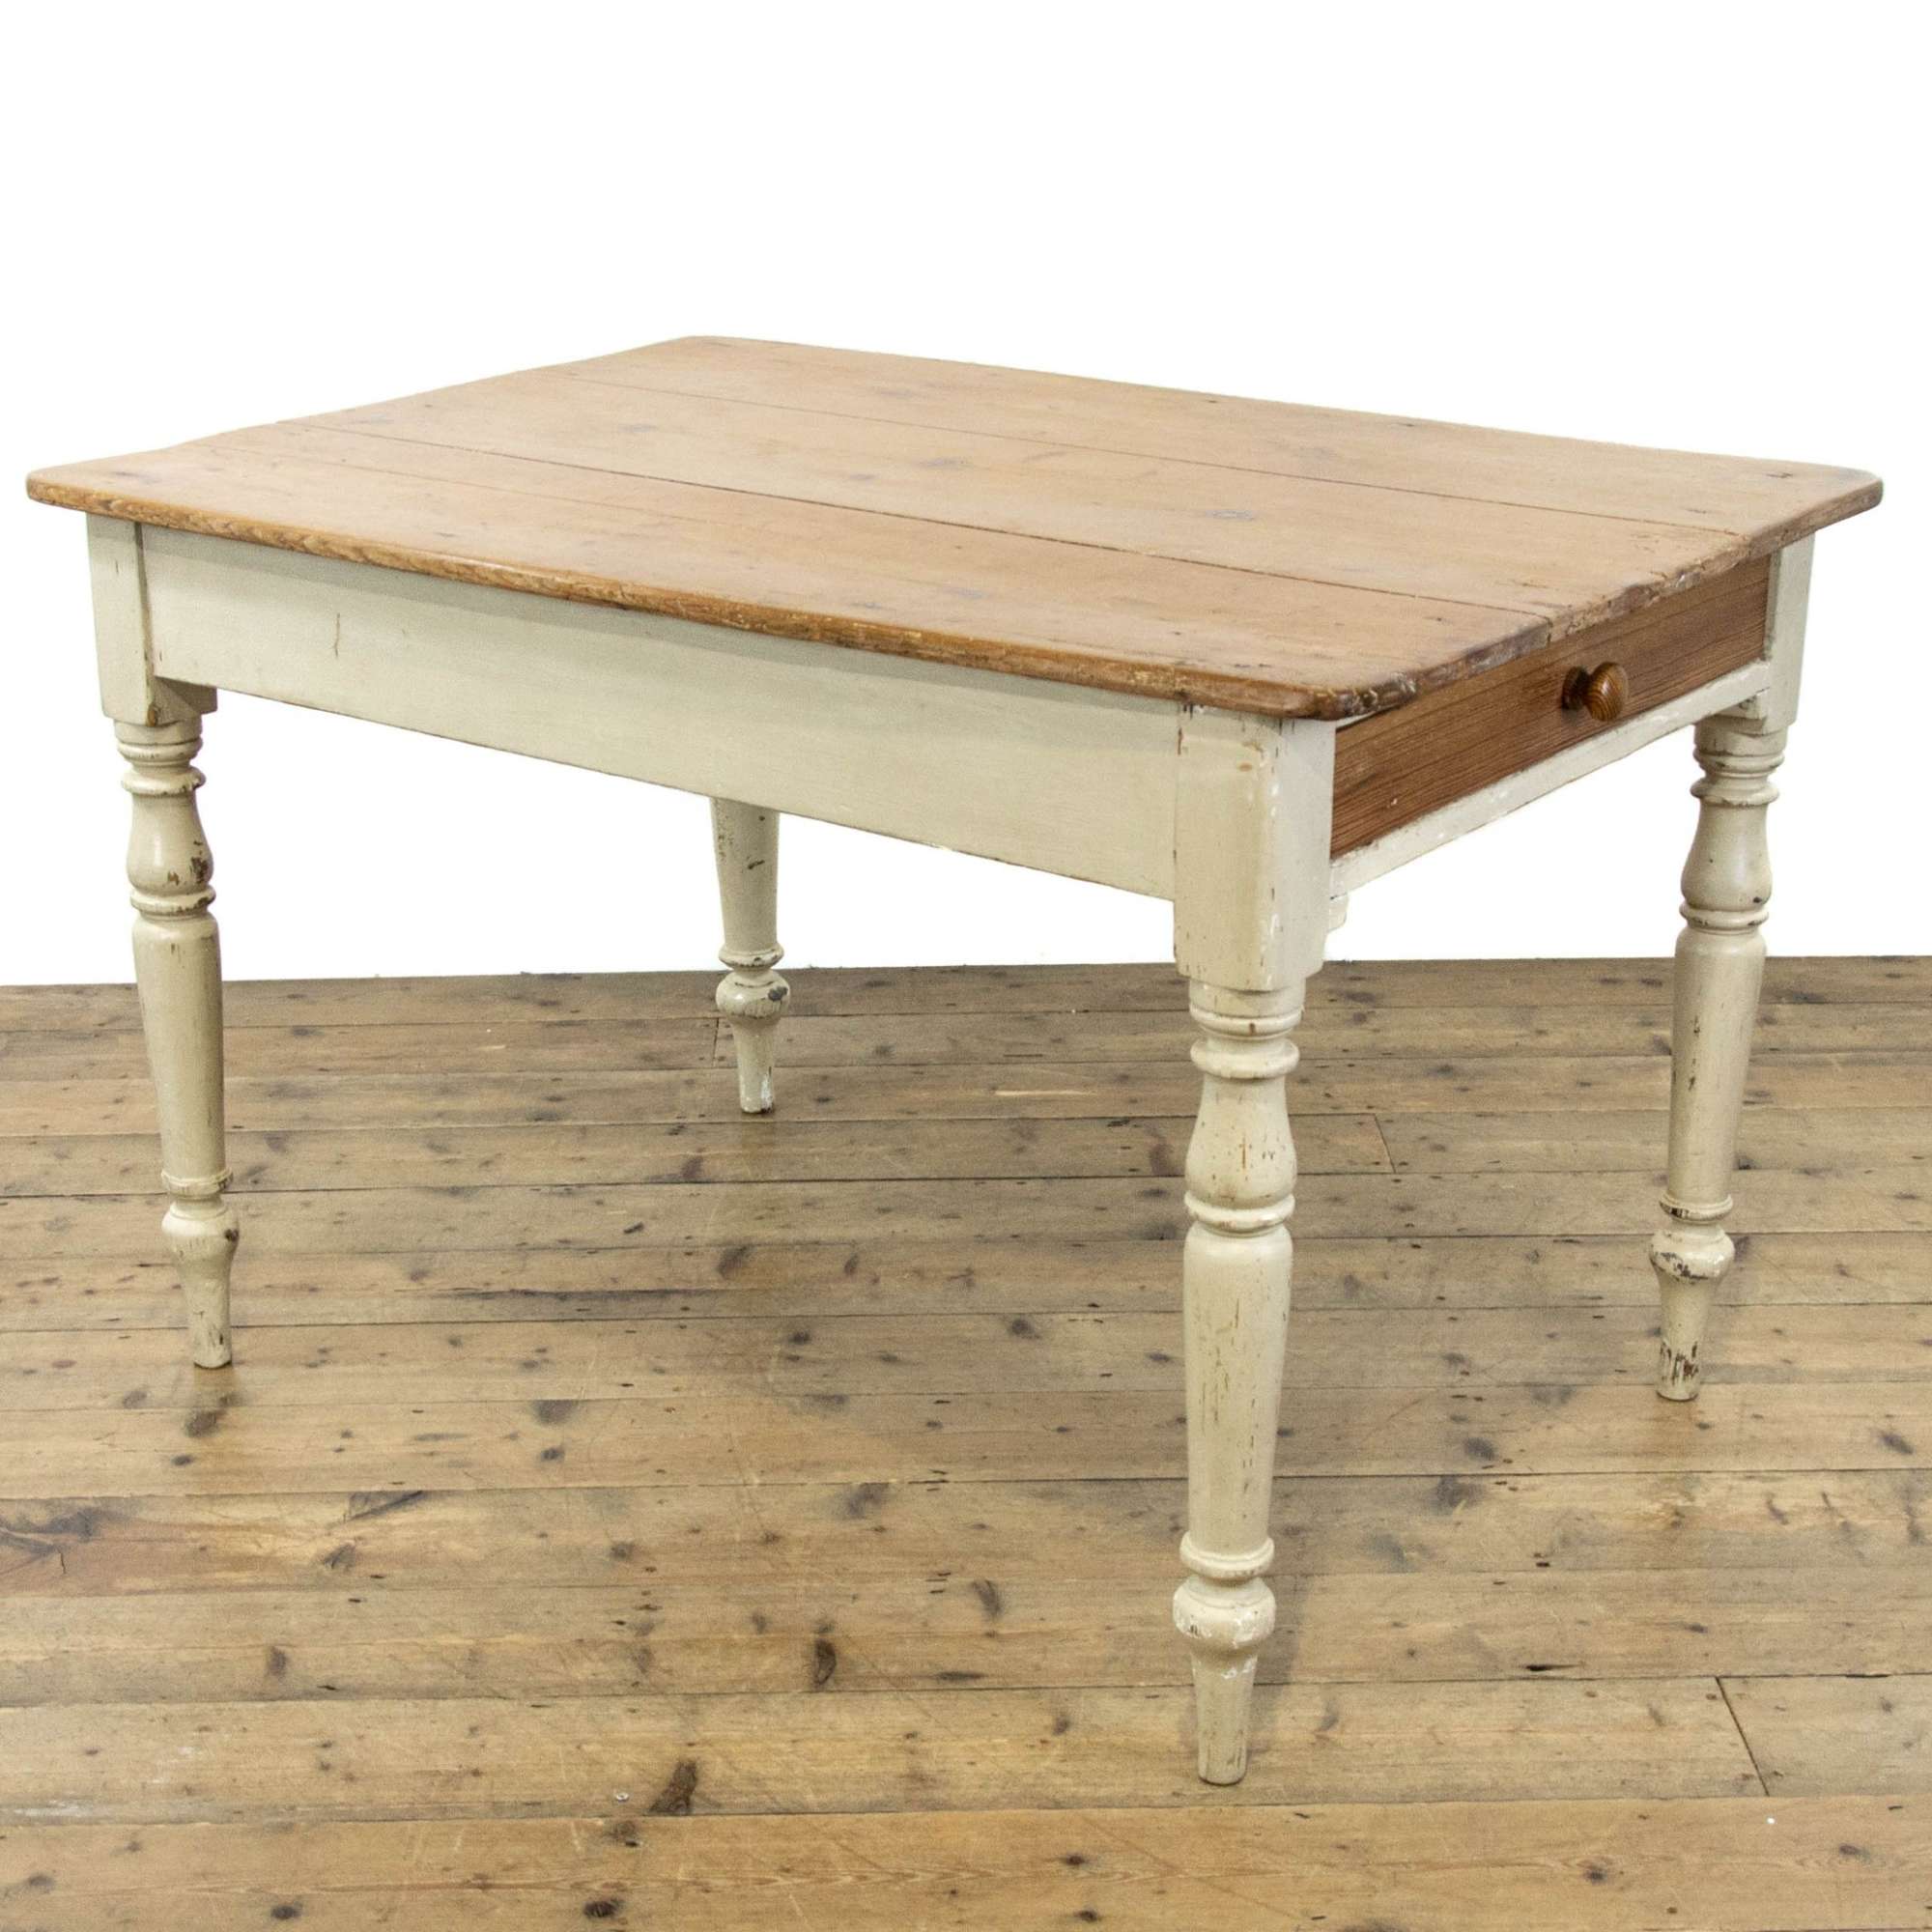 Rustic Painted Antique Pine Kitchen Table